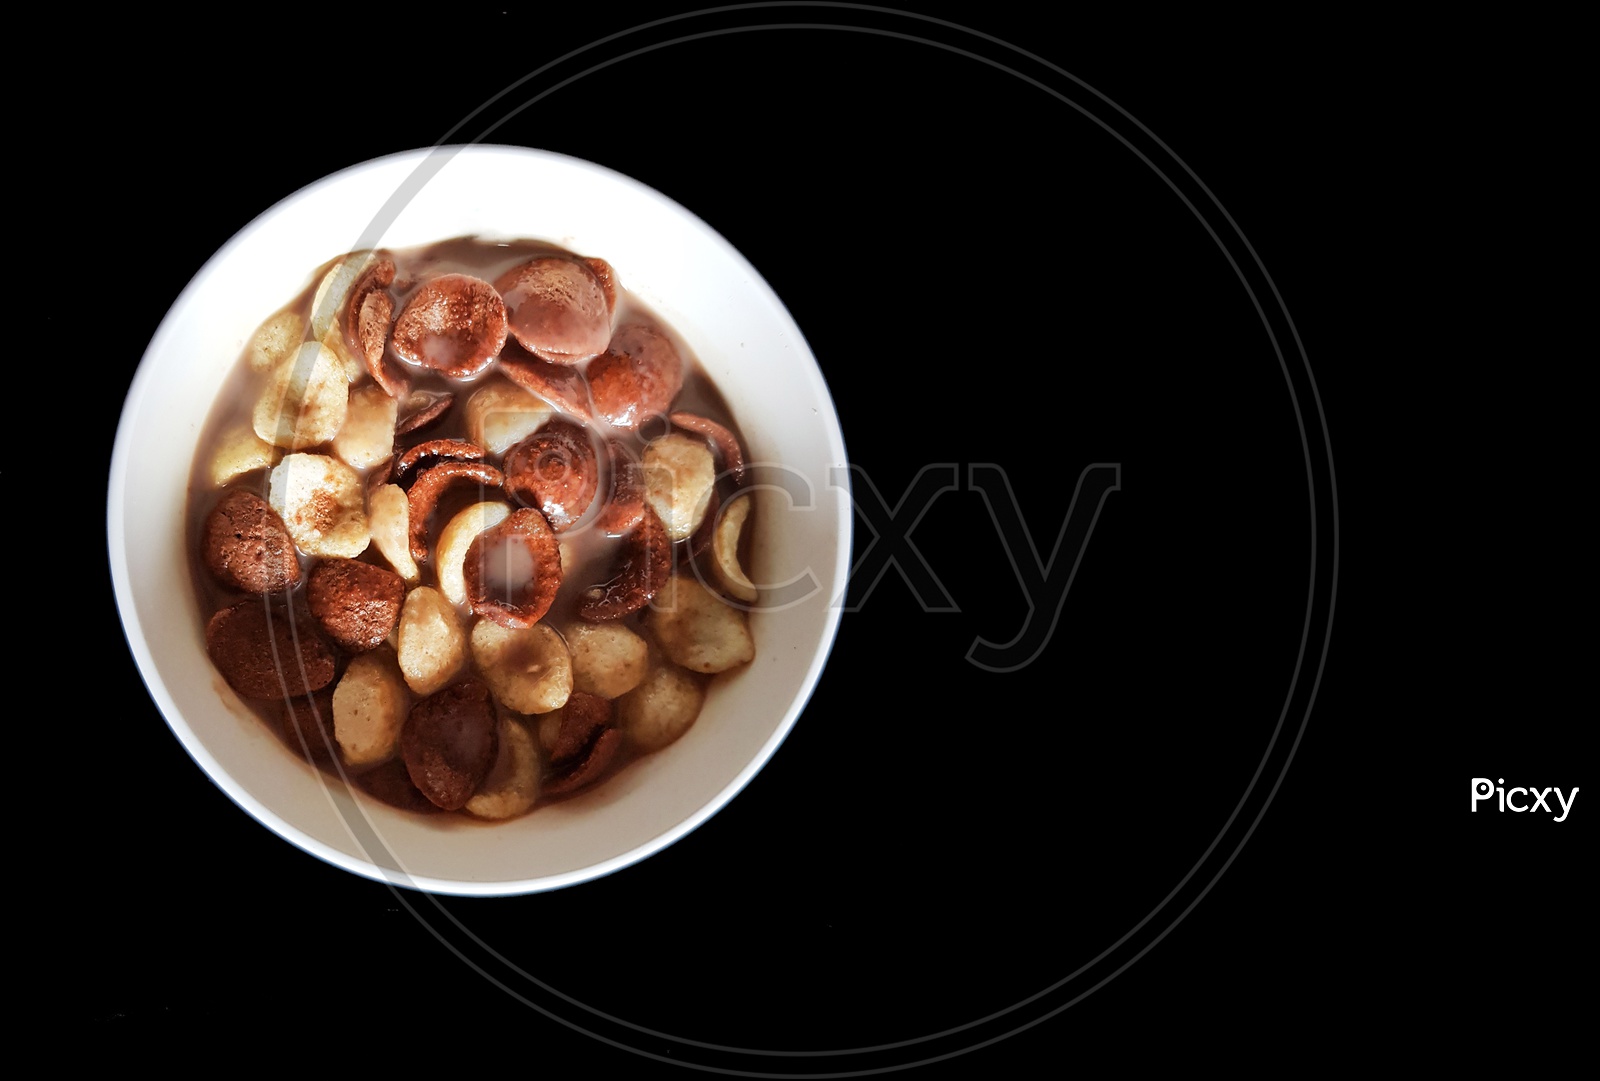 Vanilla And Chocolate Cornflakes Dipped In Chocolate Milk In A White Bowl In Black Background